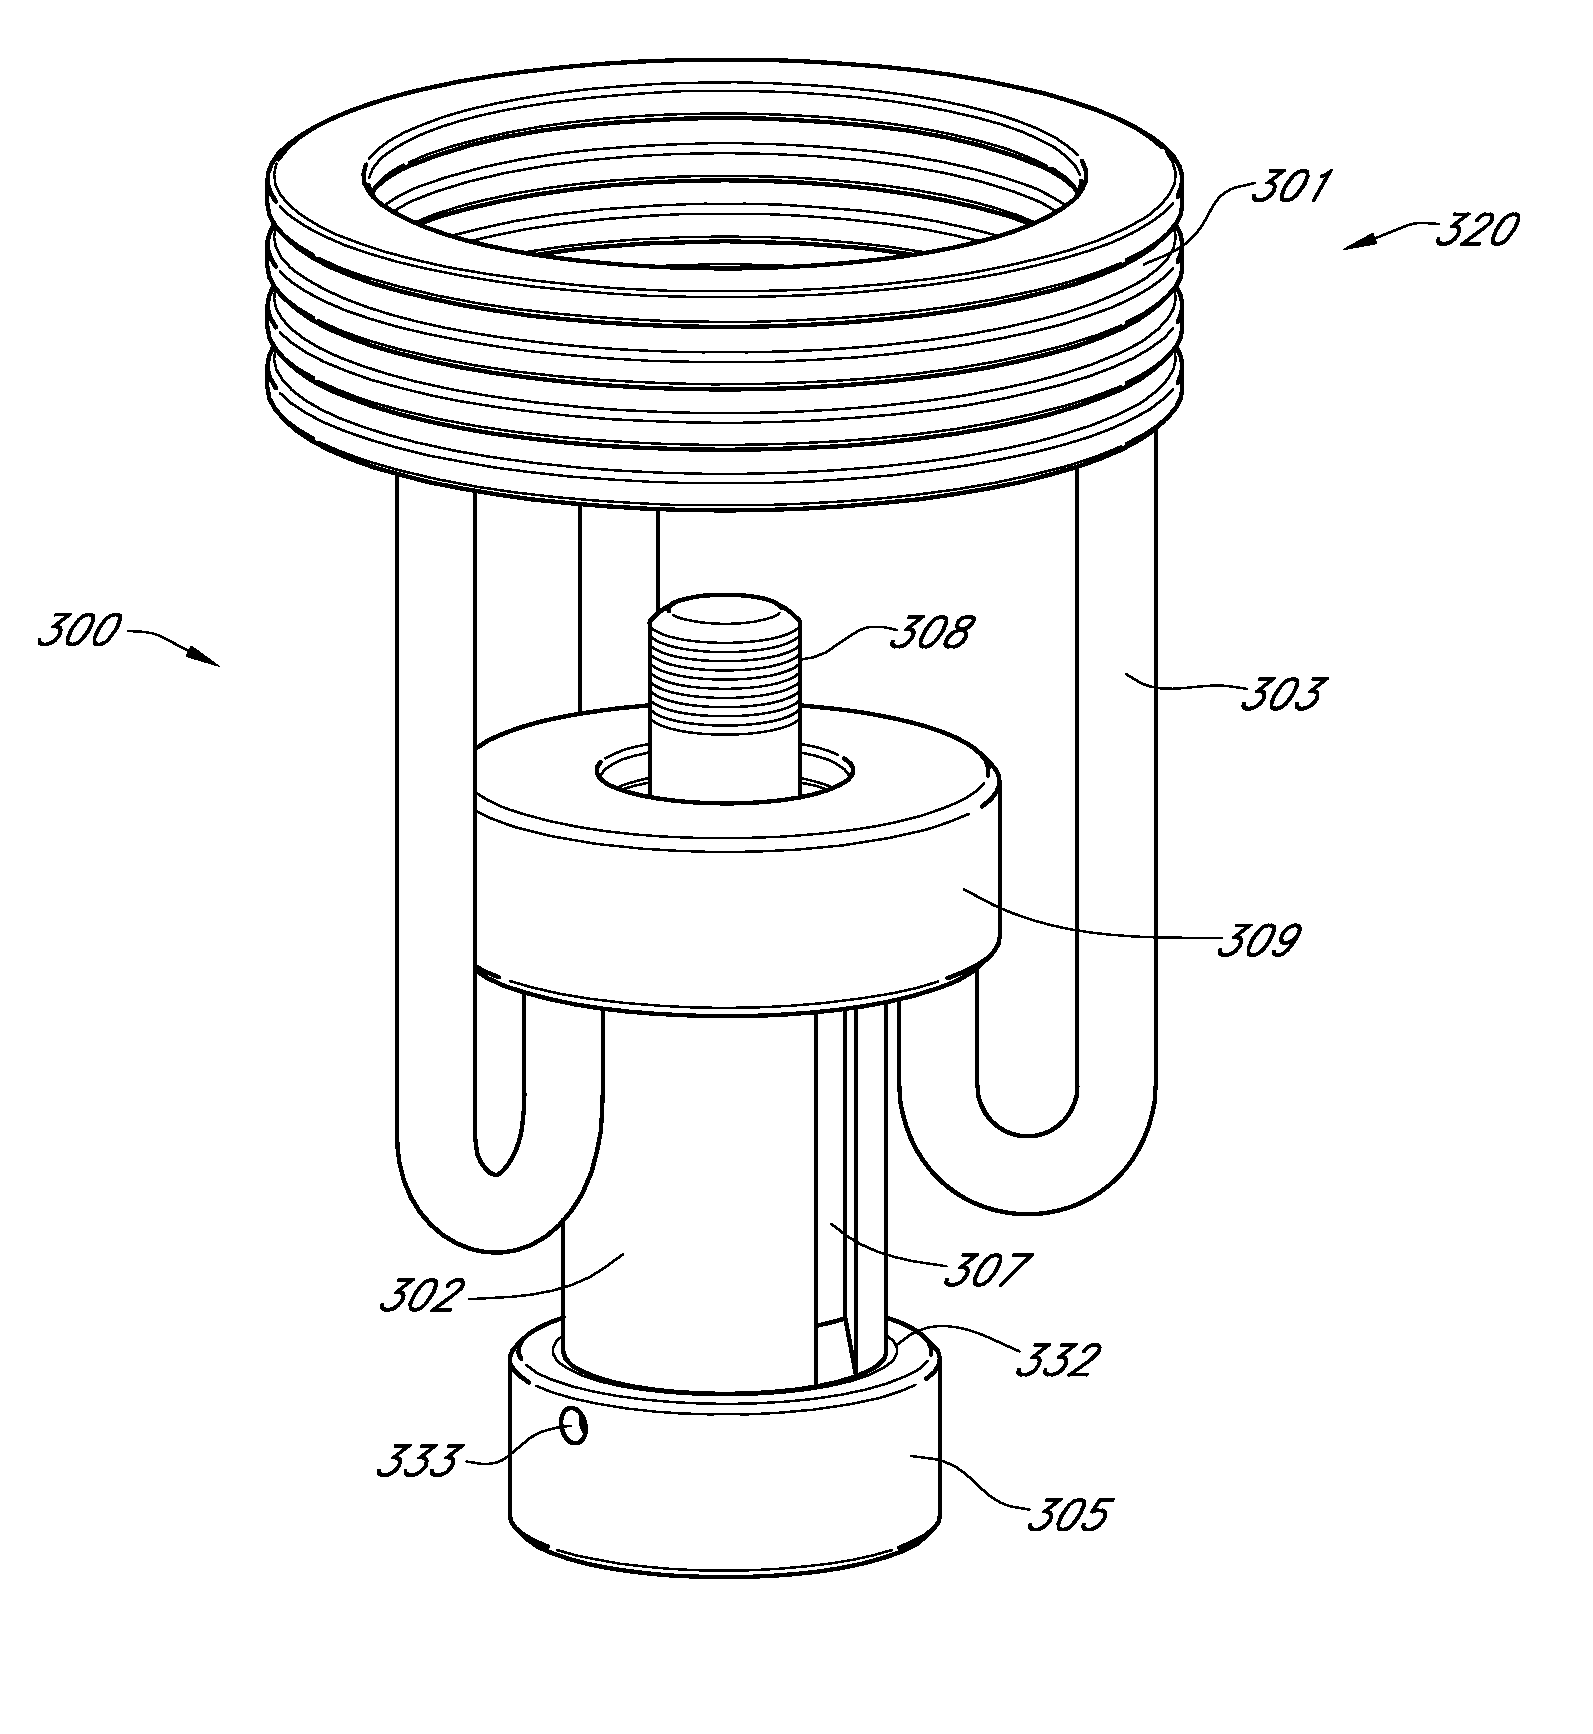 Robotically mateable rotary joint electrical connector